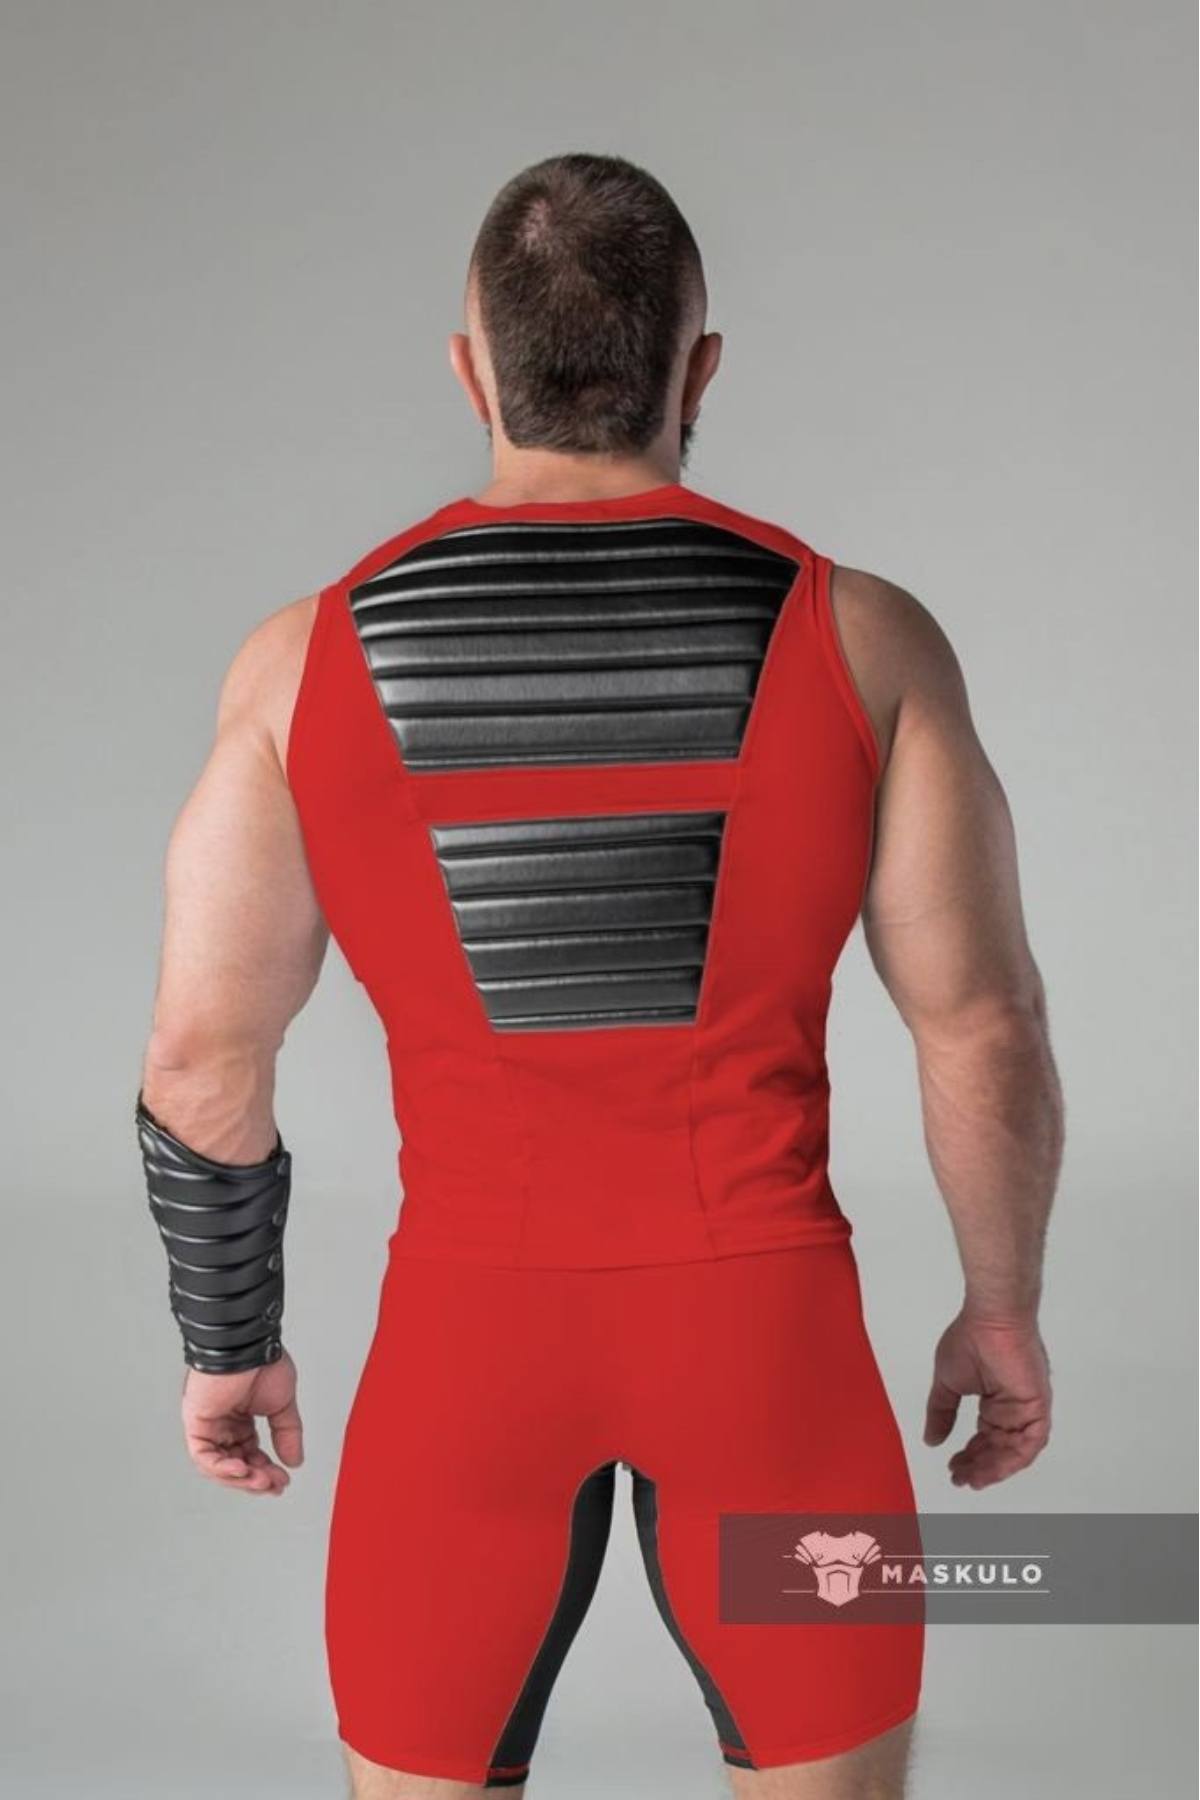 Maskulo Red Armored Tank Top